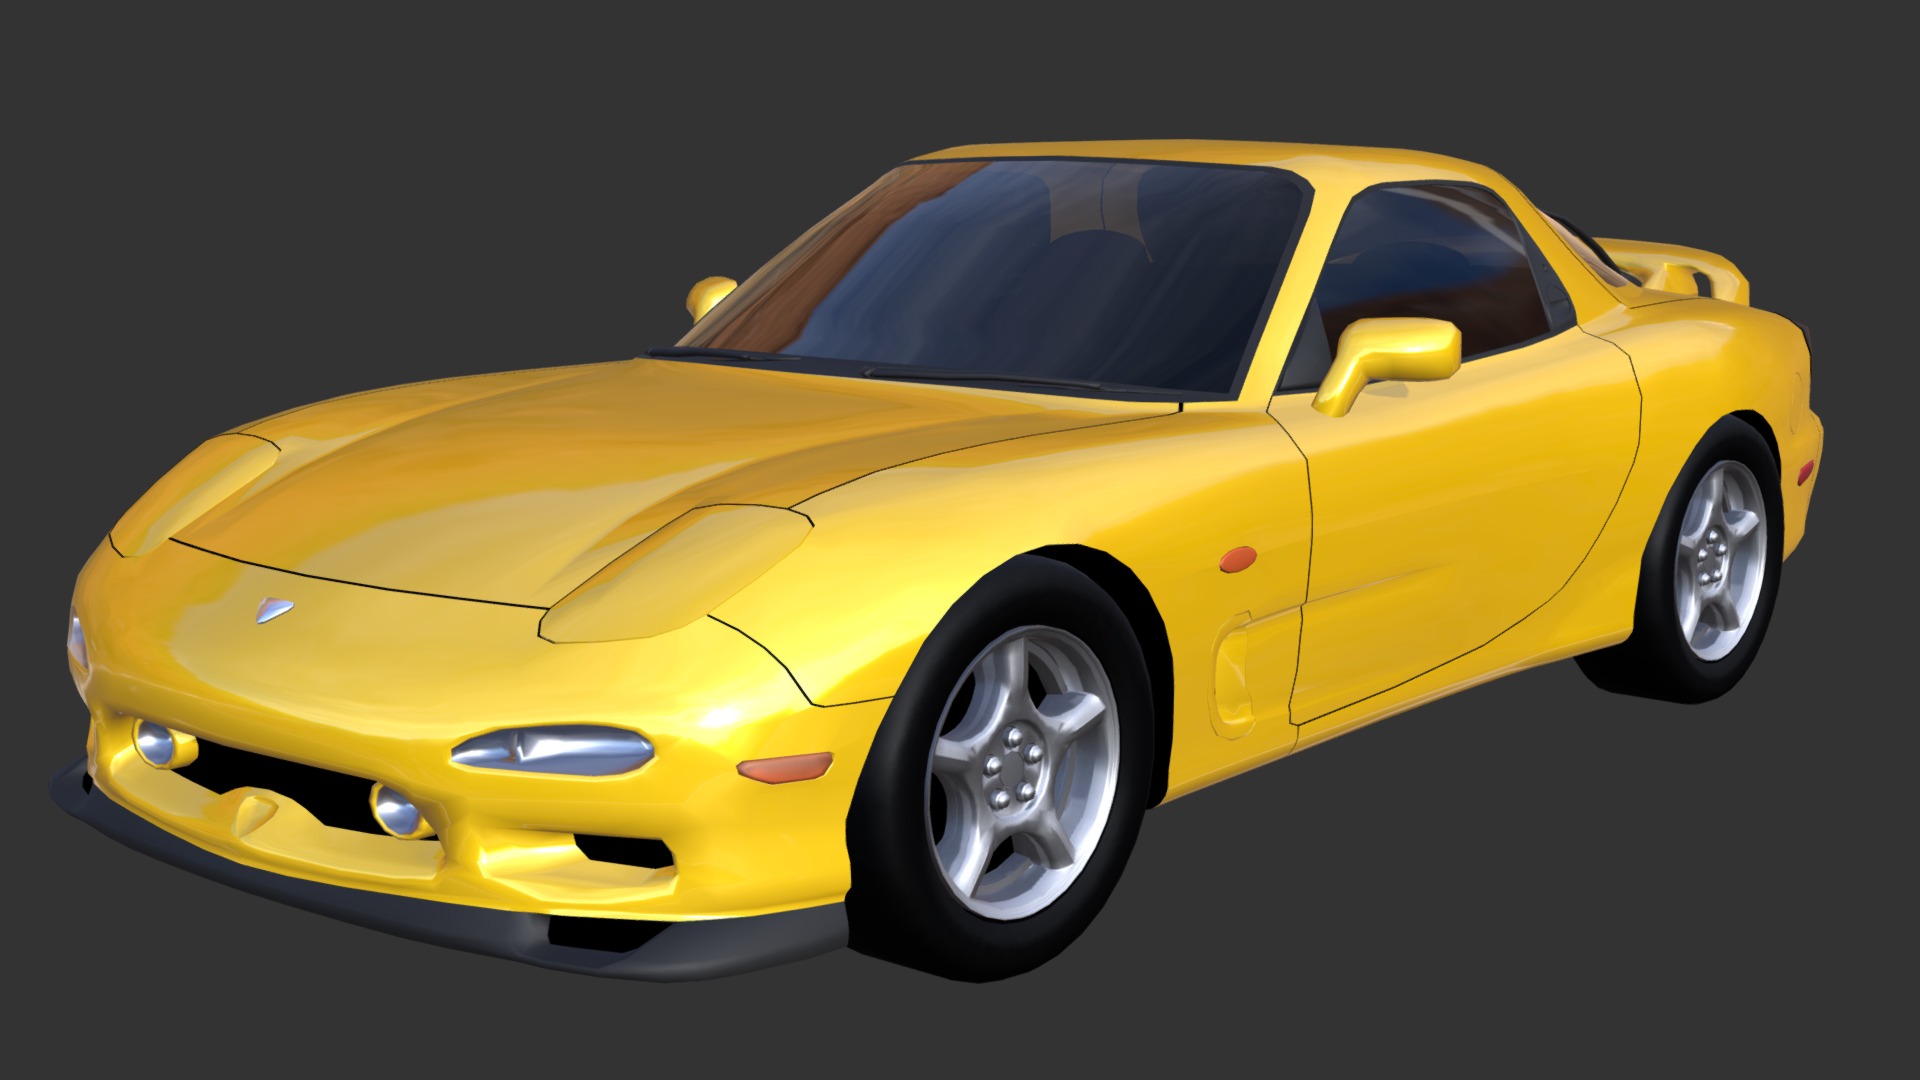 3D model Mazda RX7 FD - This is a 3D model of the Mazda RX7 FD. The 3D model is about a yellow sports car.